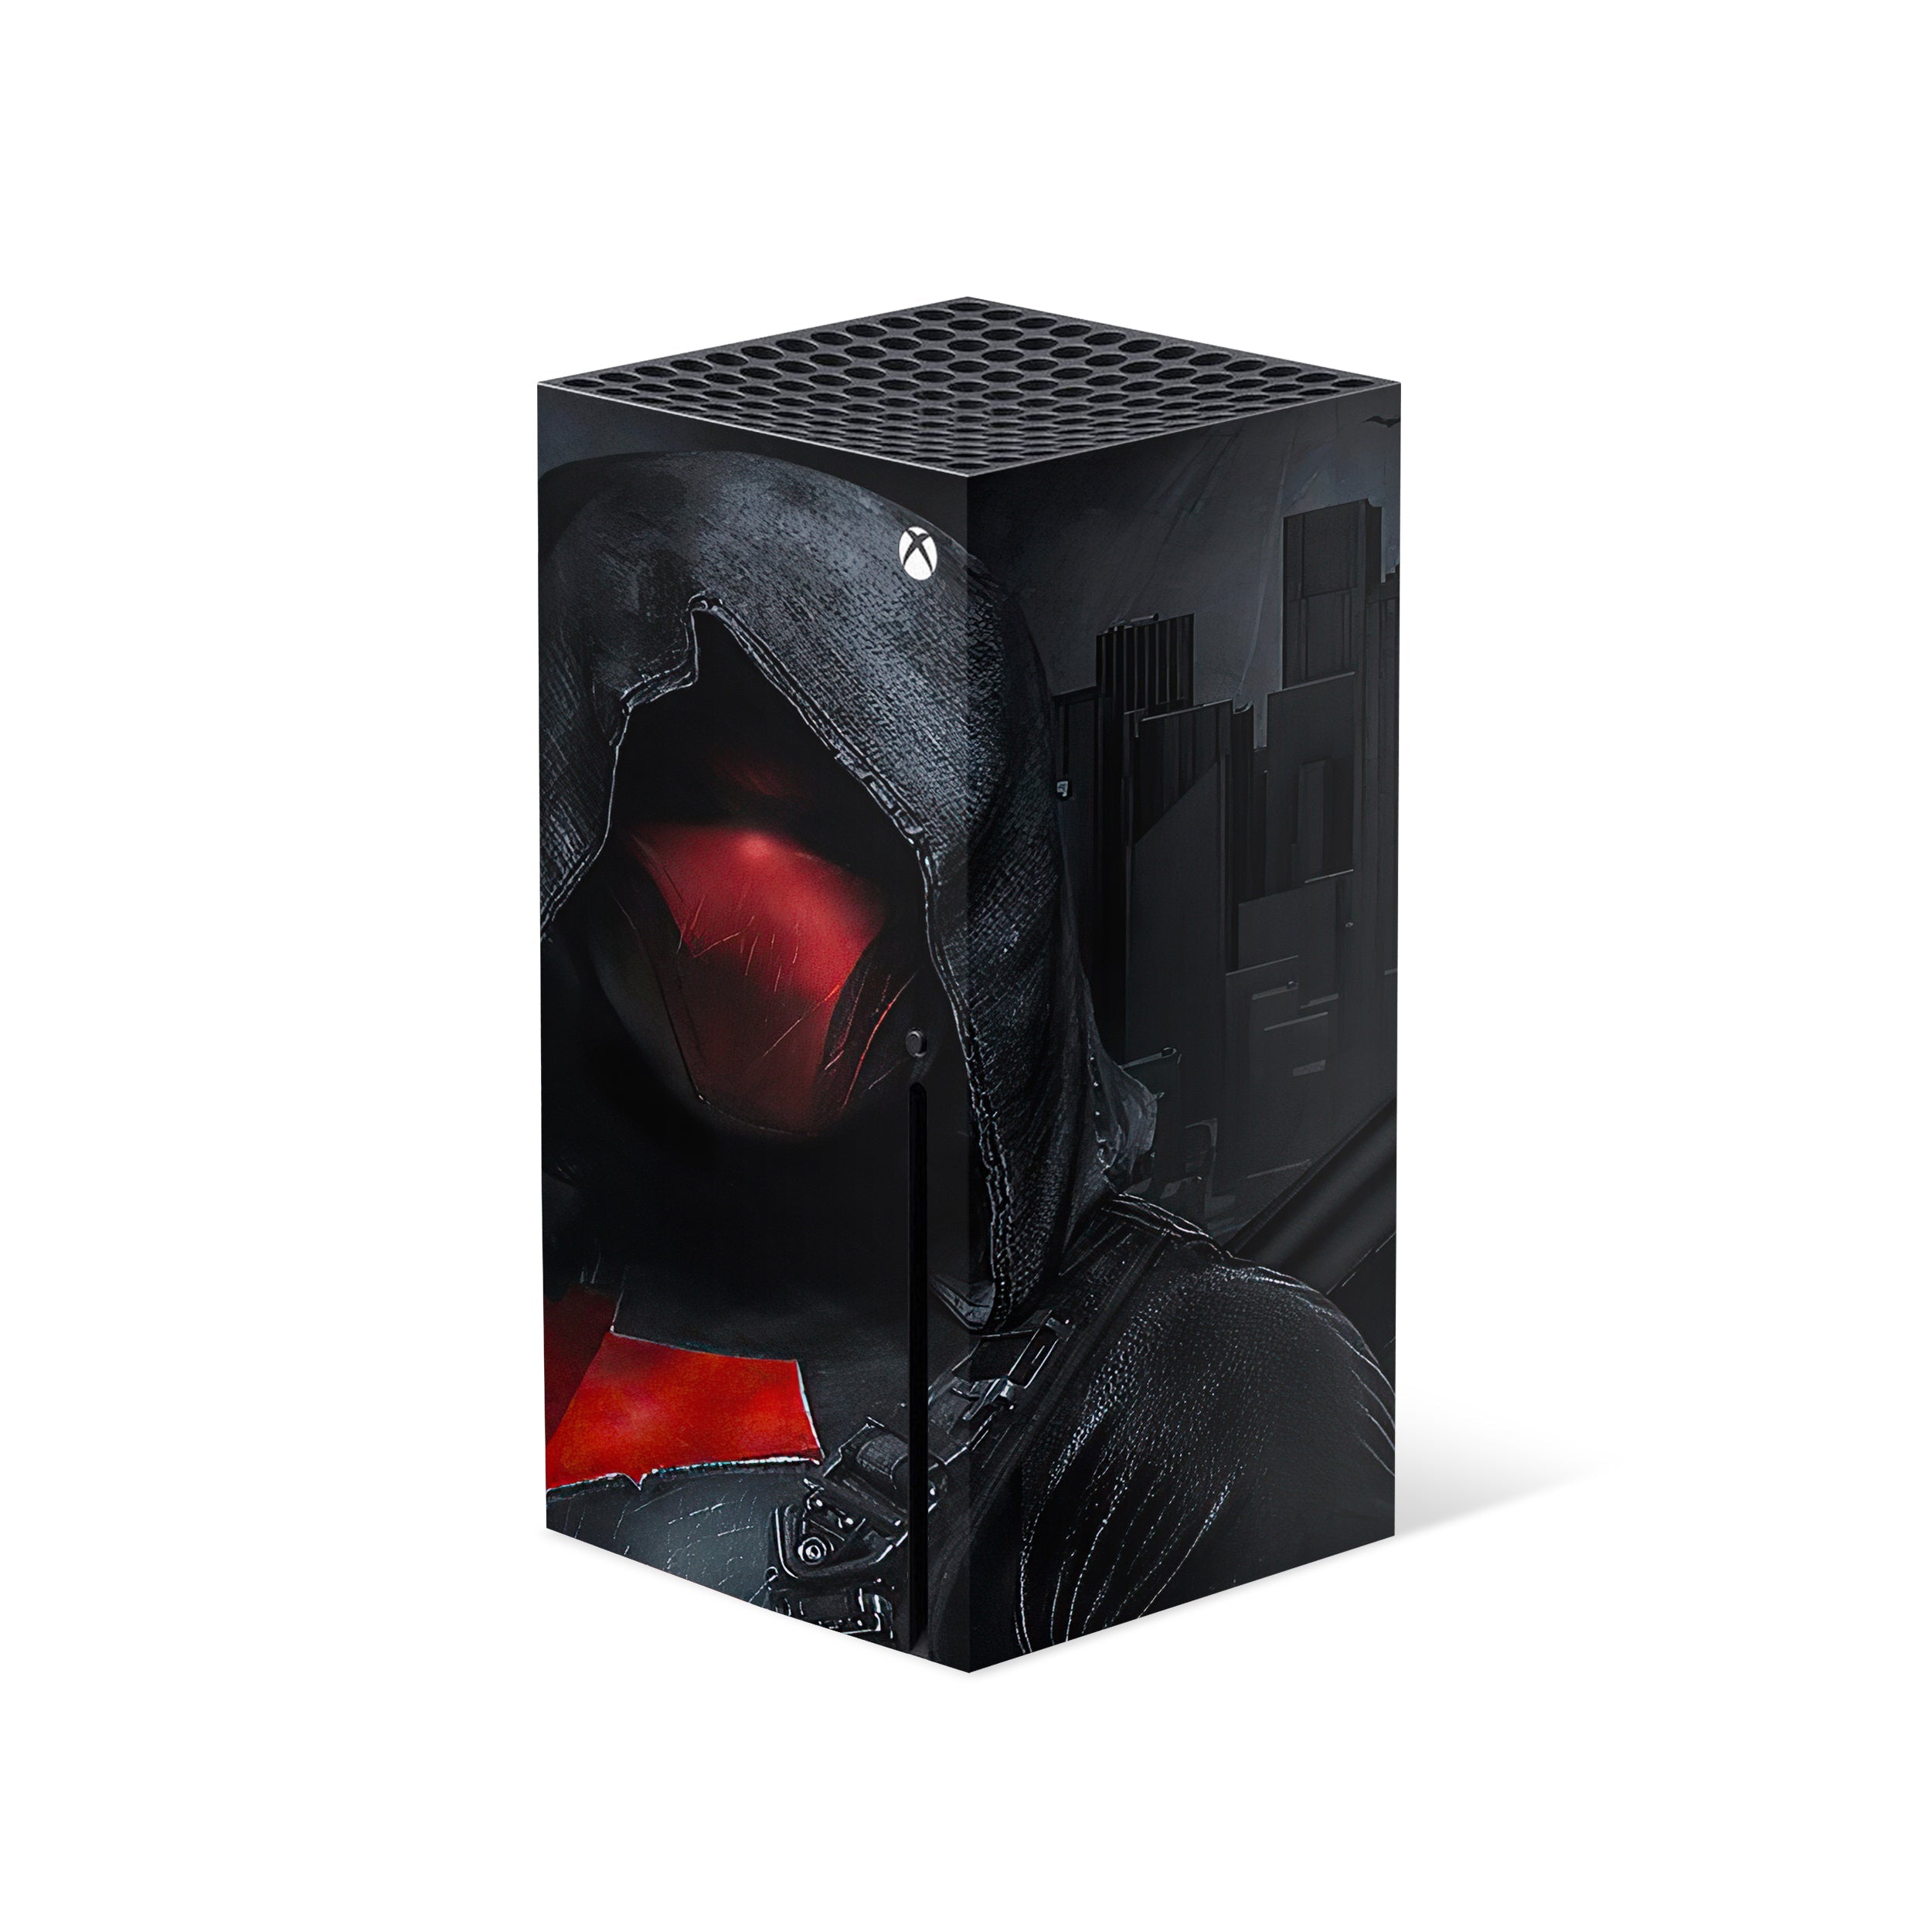 A video game skin featuring a DC Comics Red Hood design for the Xbox Series X.